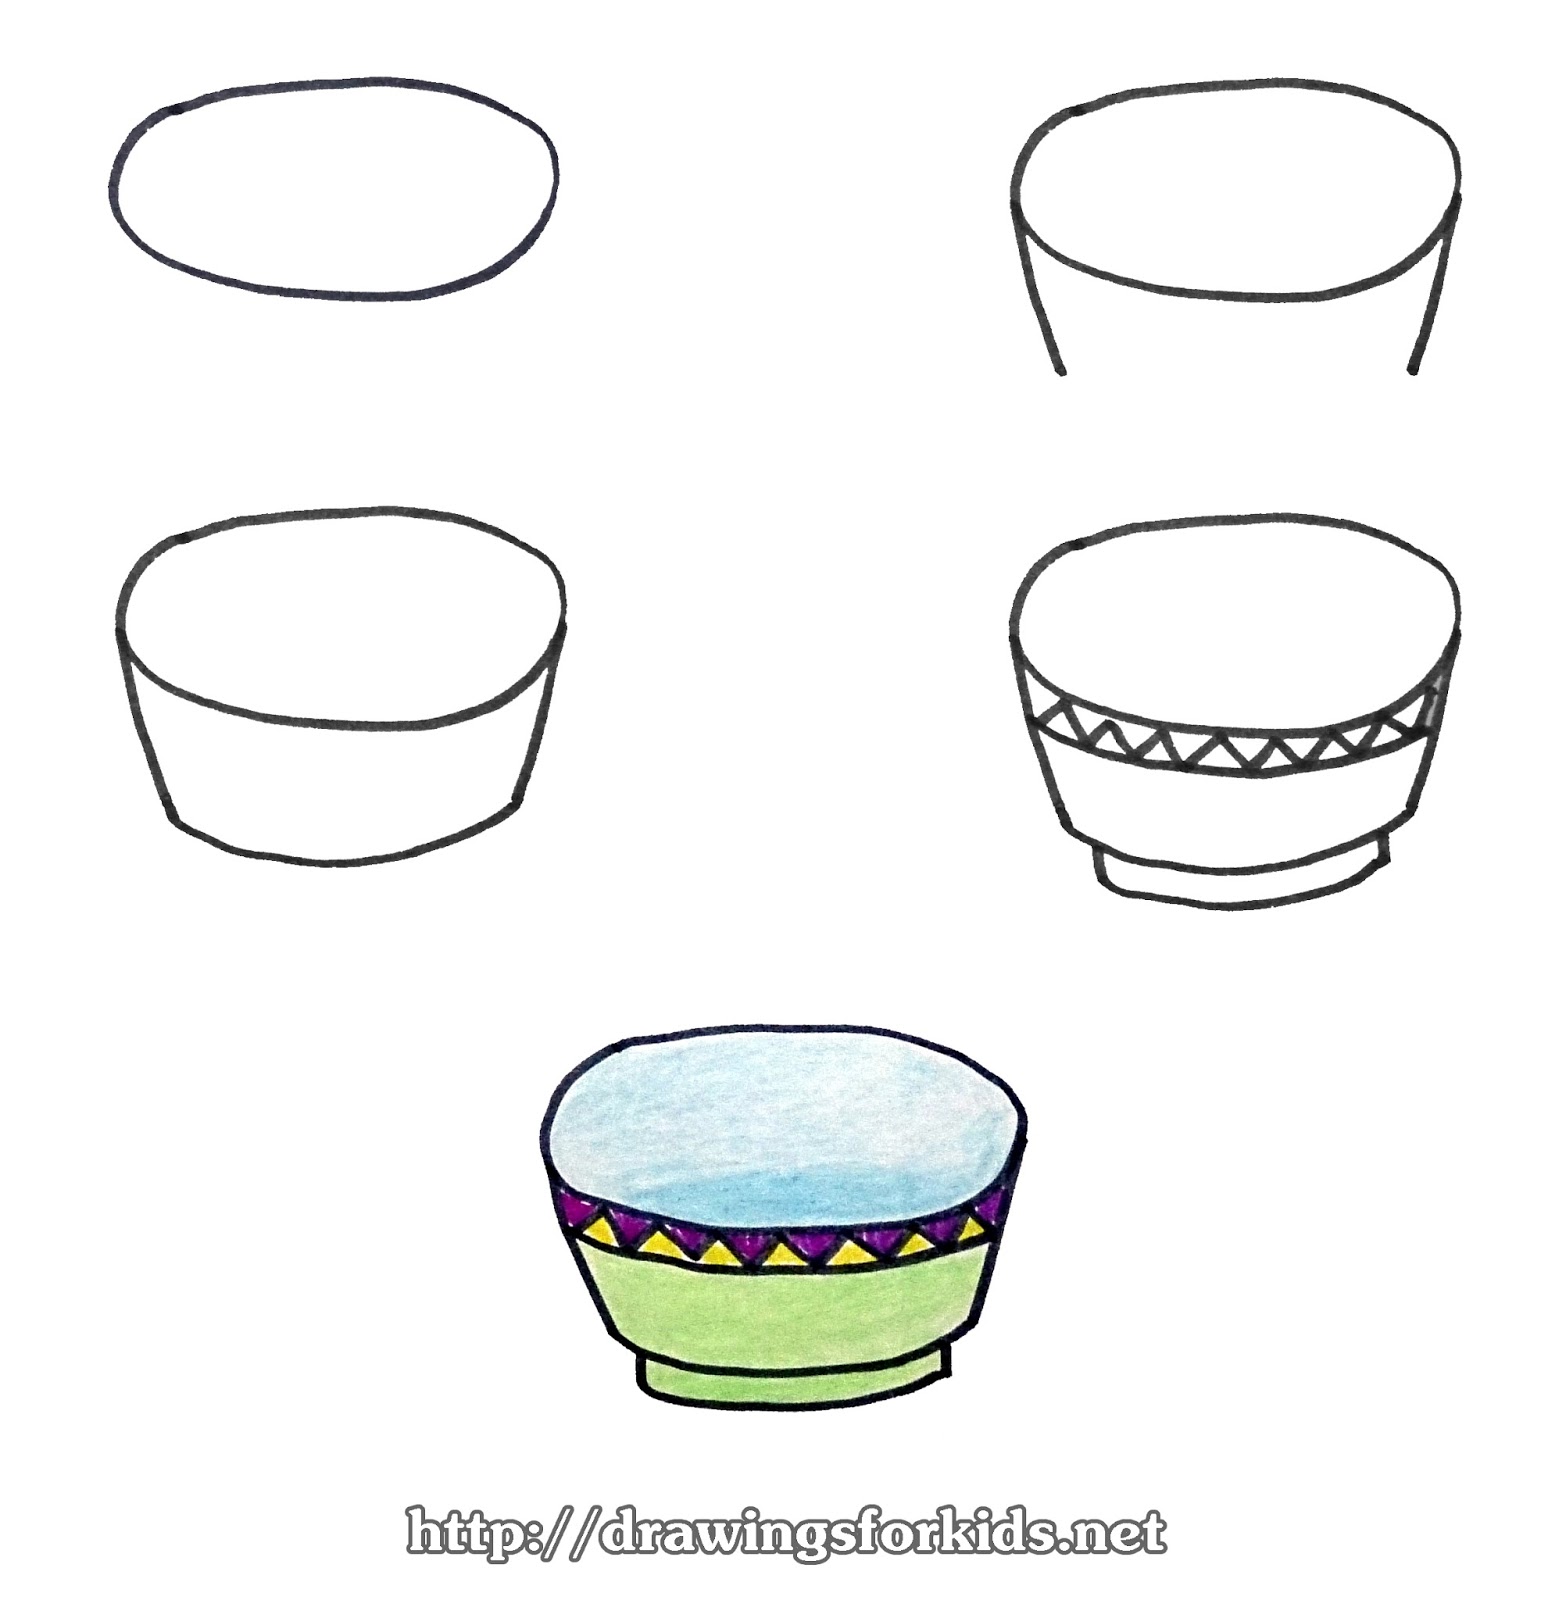 How to draw a Bowl for kids - drawingsforkids.net